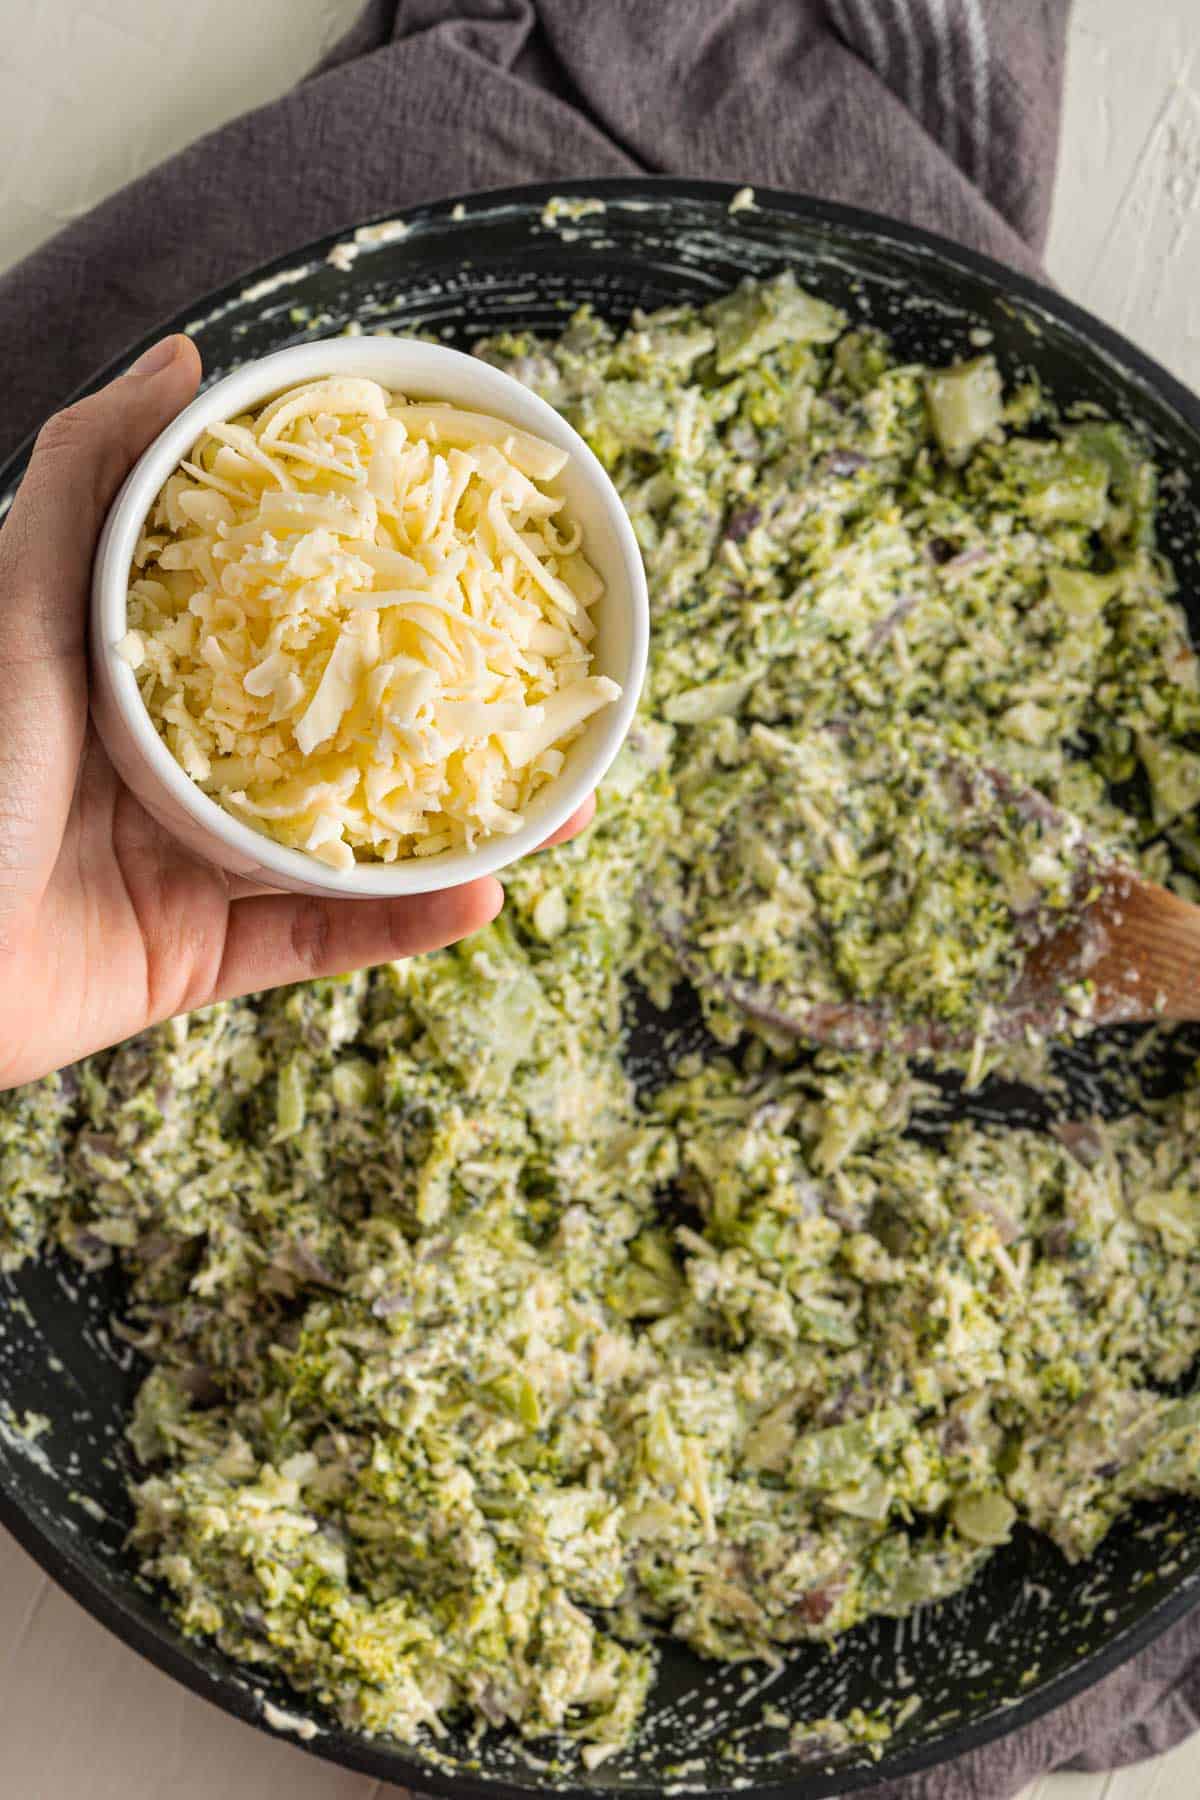 Pouring grated cheese into a pan with broccoli for dip.